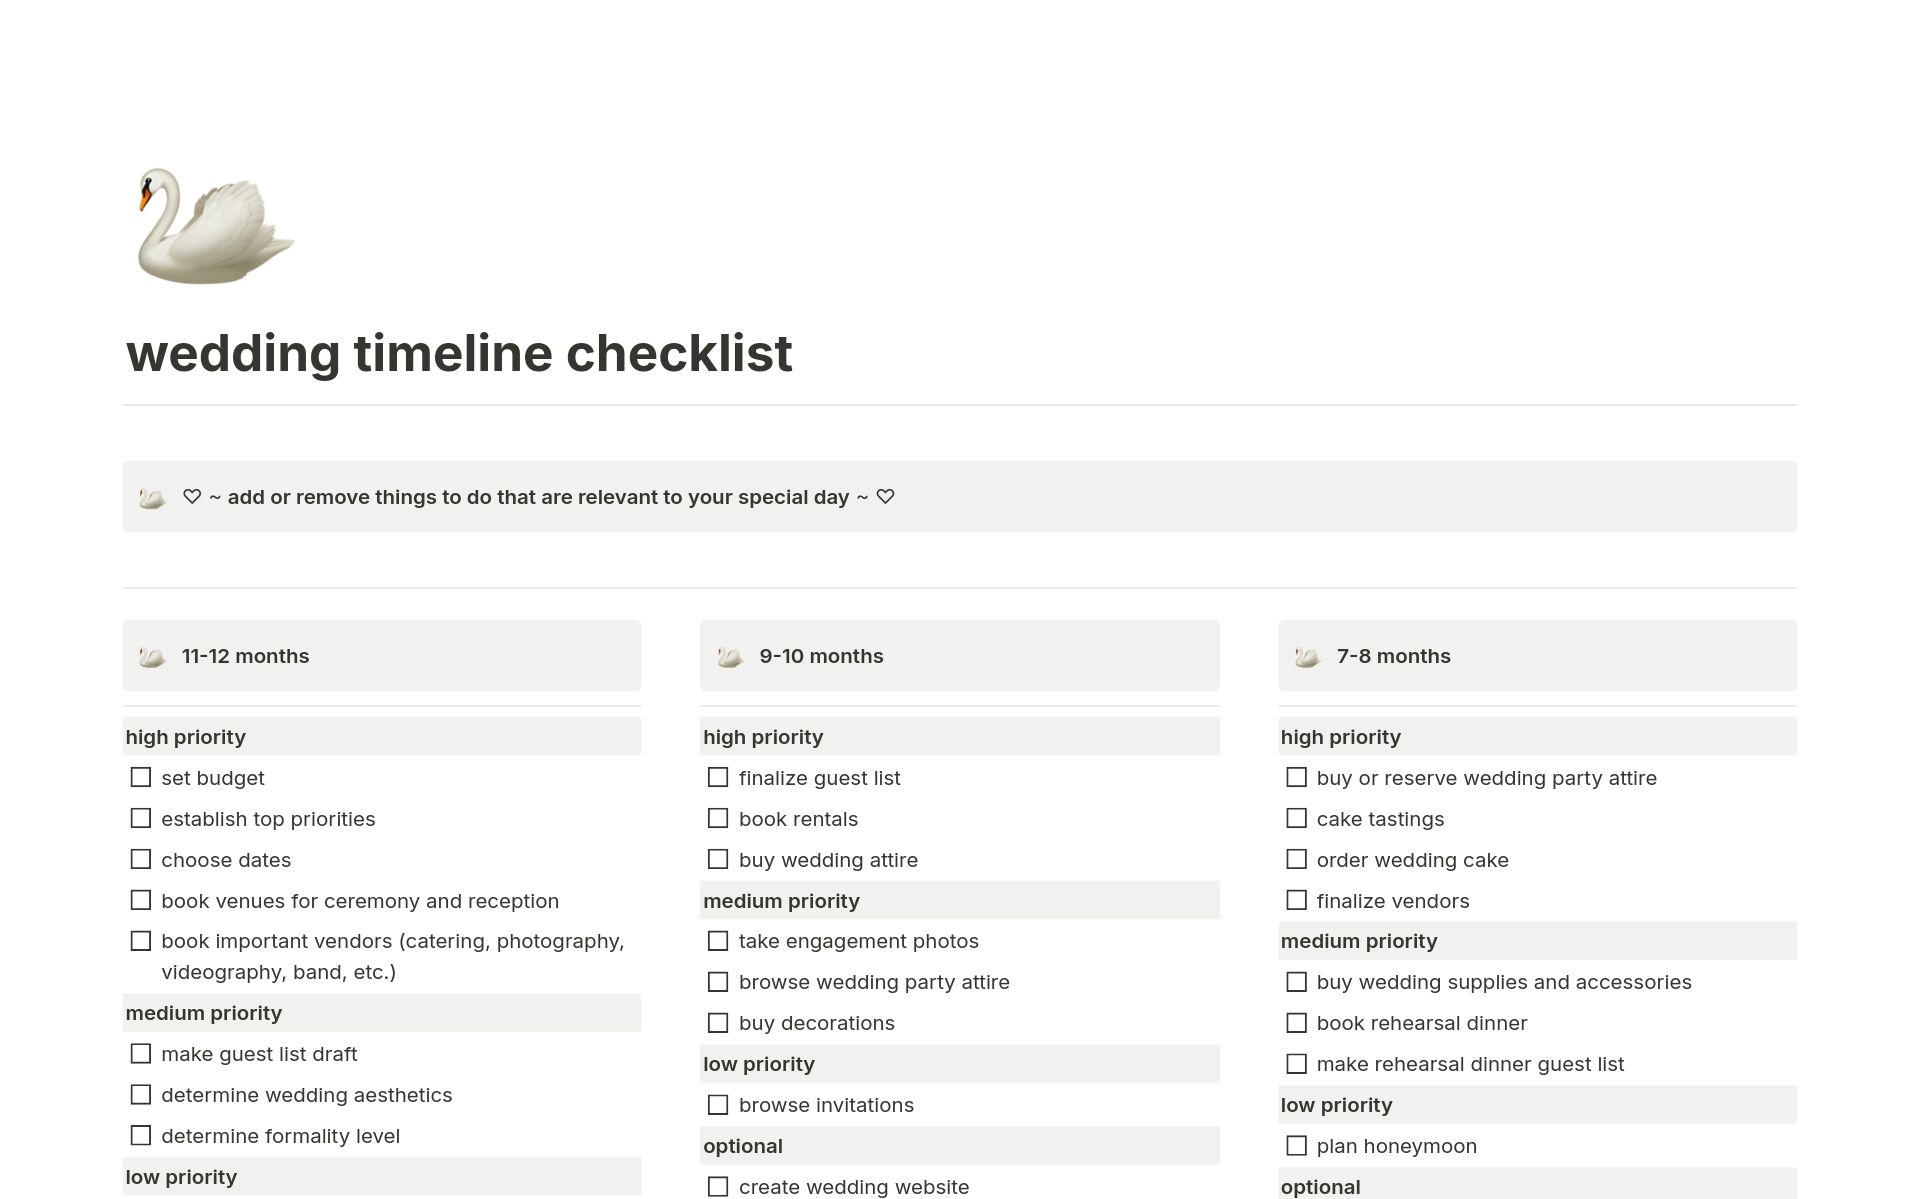 simple, easy to use wedding timeline checklist.